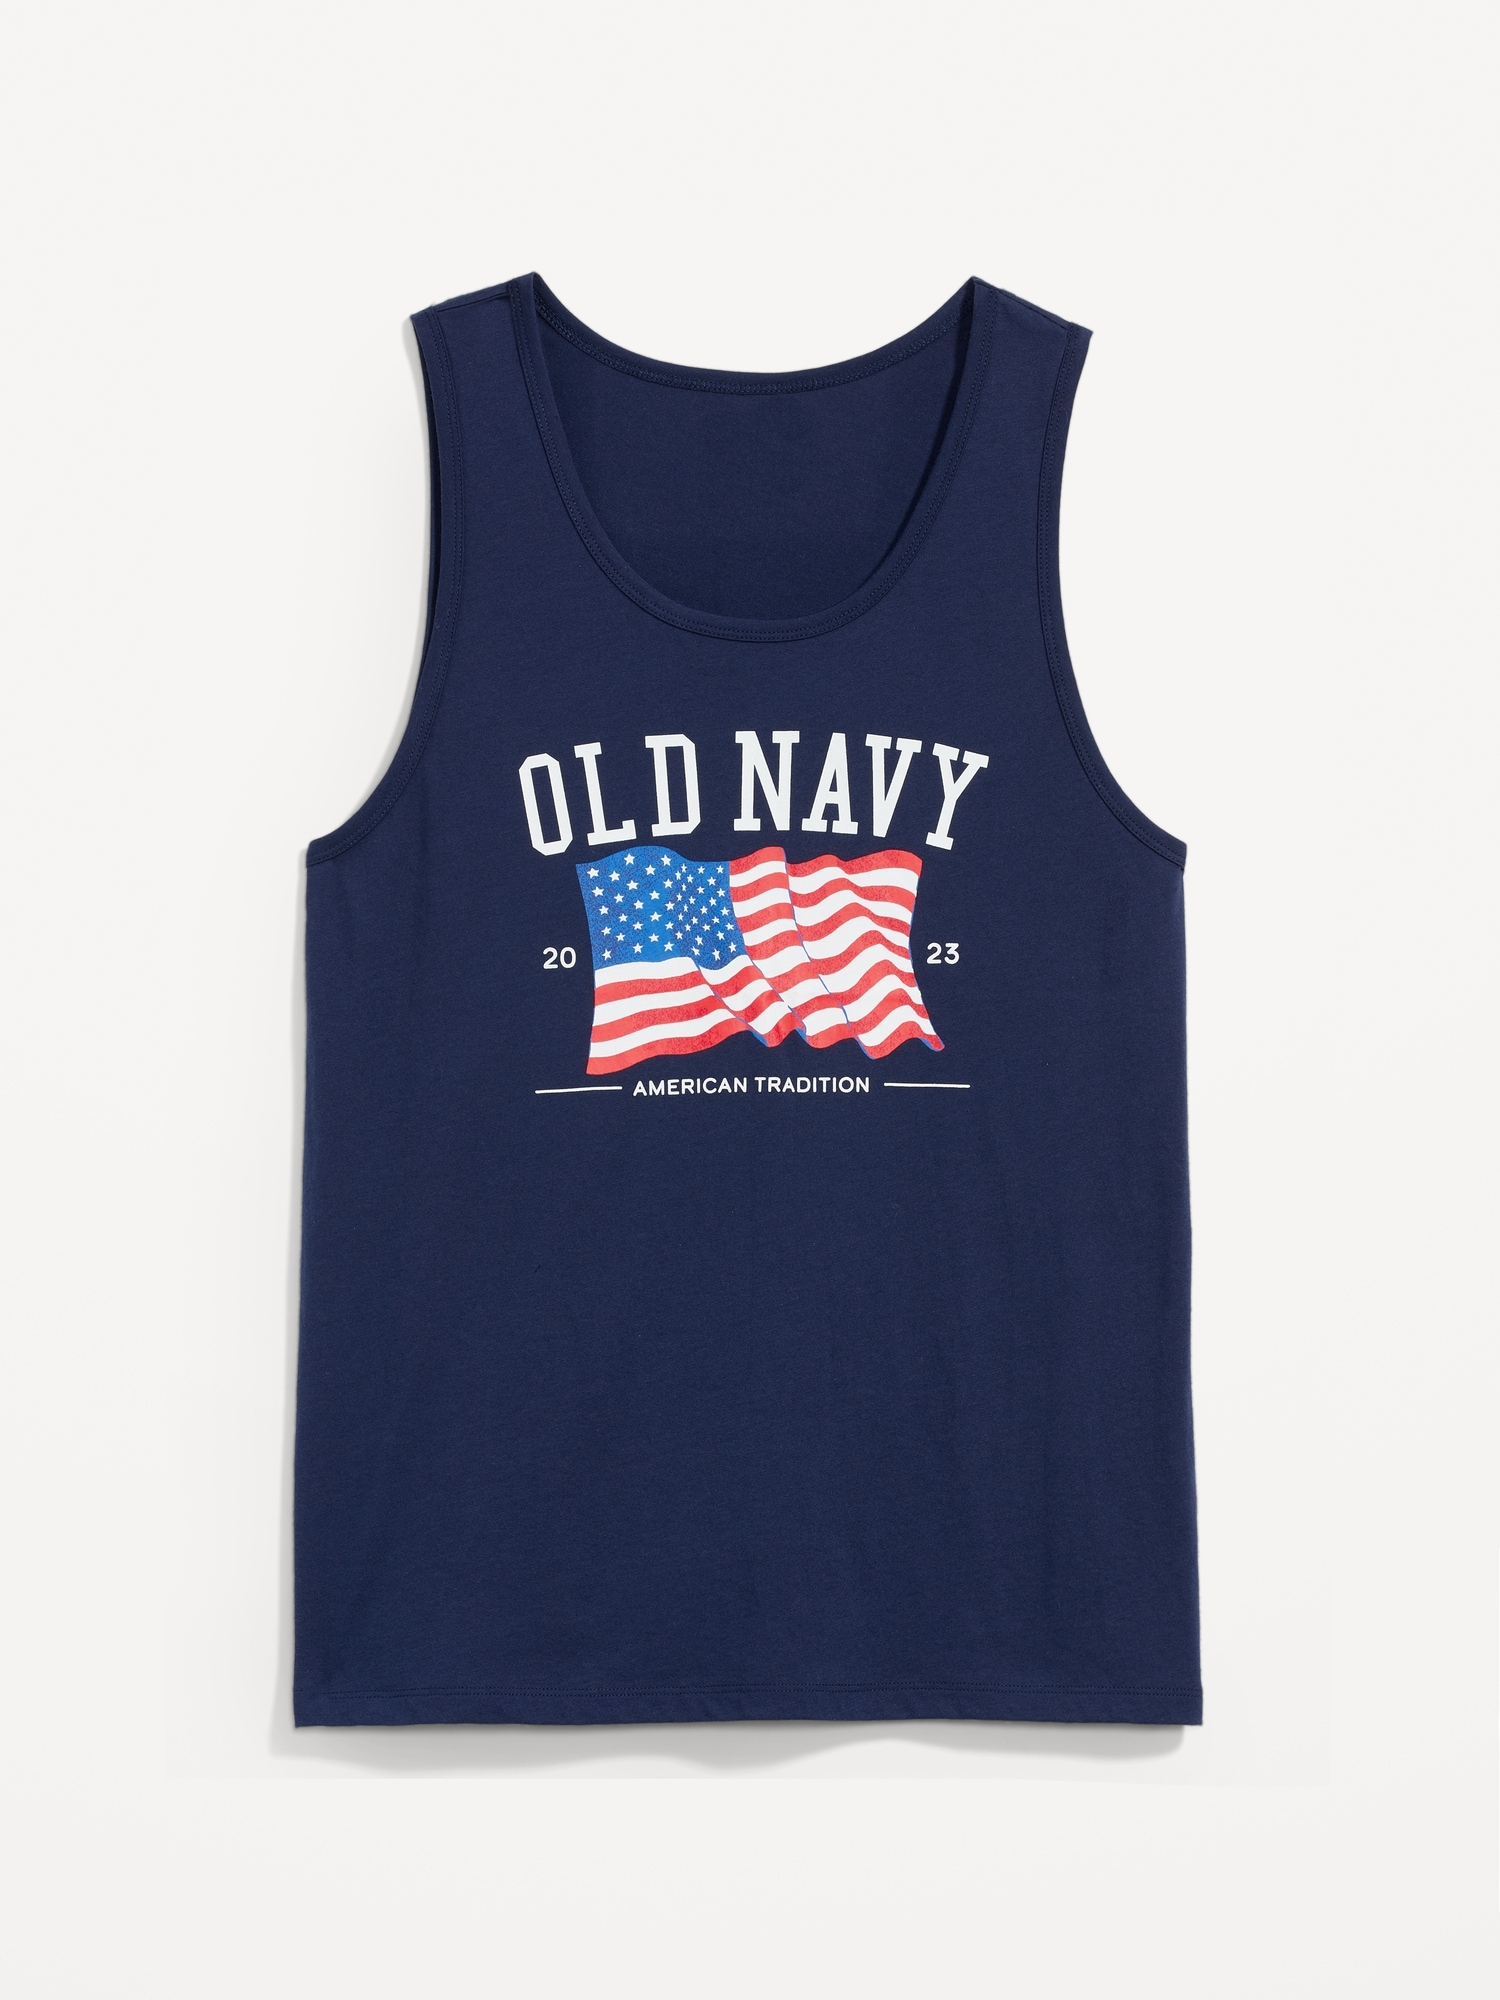 Matching Old Navy Flag Graphic Tank Top